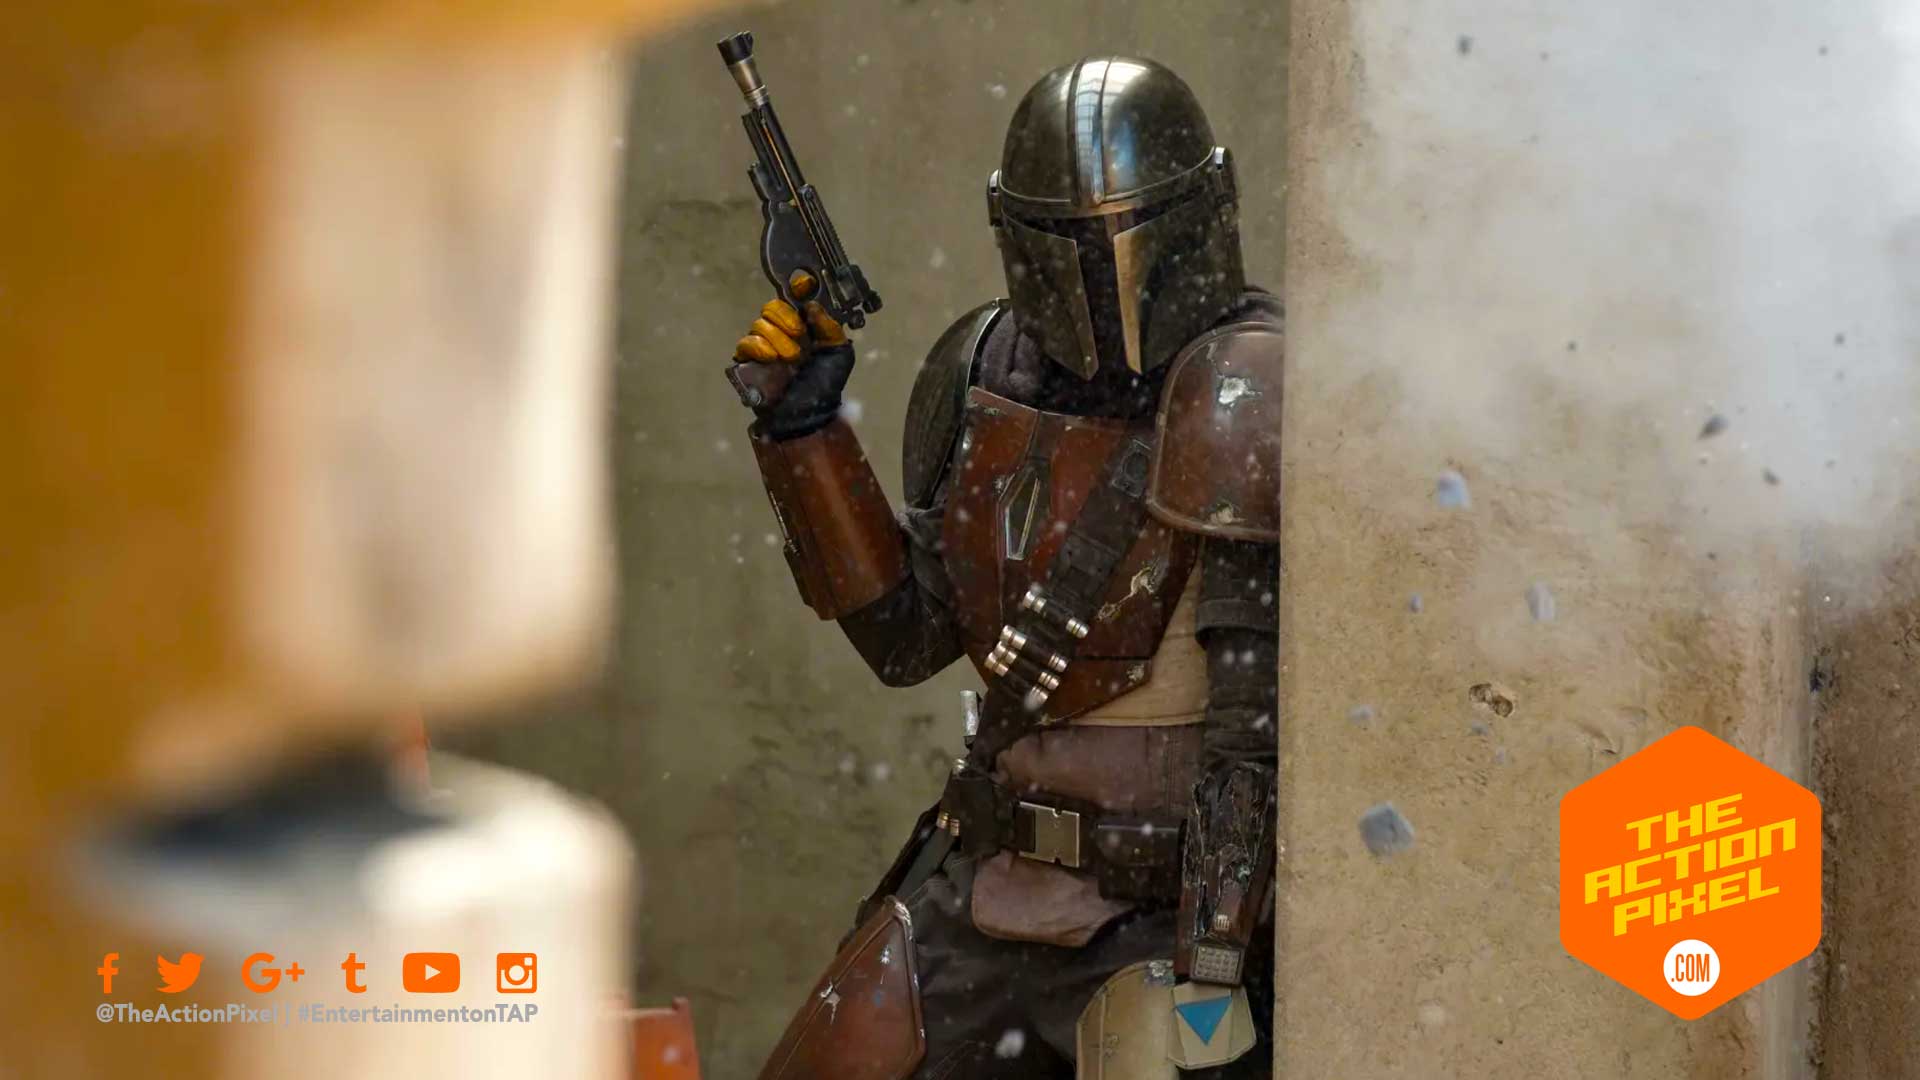 greef, star wars,mandalorian, live-action tv series, the action pixel, entertainment on tap, on Favreau, Dave Filoni, Kathleen Kennedy, Colin Wilson,Karen Gilchrist, carl weathers, gina carano, featured, star wars celebration 2019